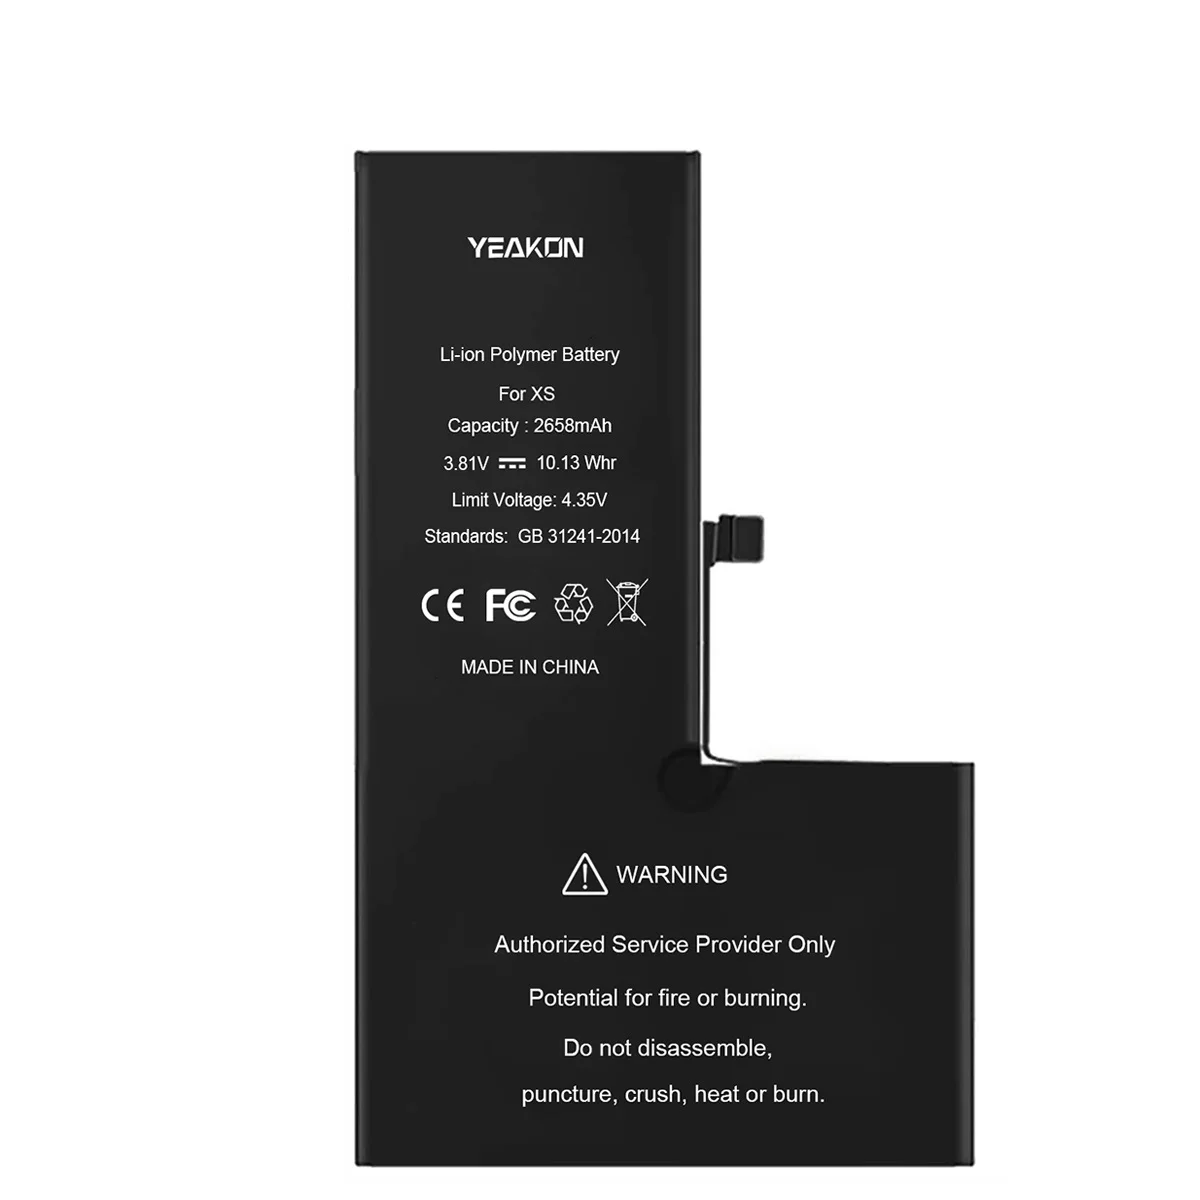 

YEAKON XS X S Battery Replacement For iPhone 5 5S 5C SE 6 6S 6P 6SP 7 7G 7P 8 8G 8P Plus X XS MAX XR 11 12 13 Pro MAX Batteries